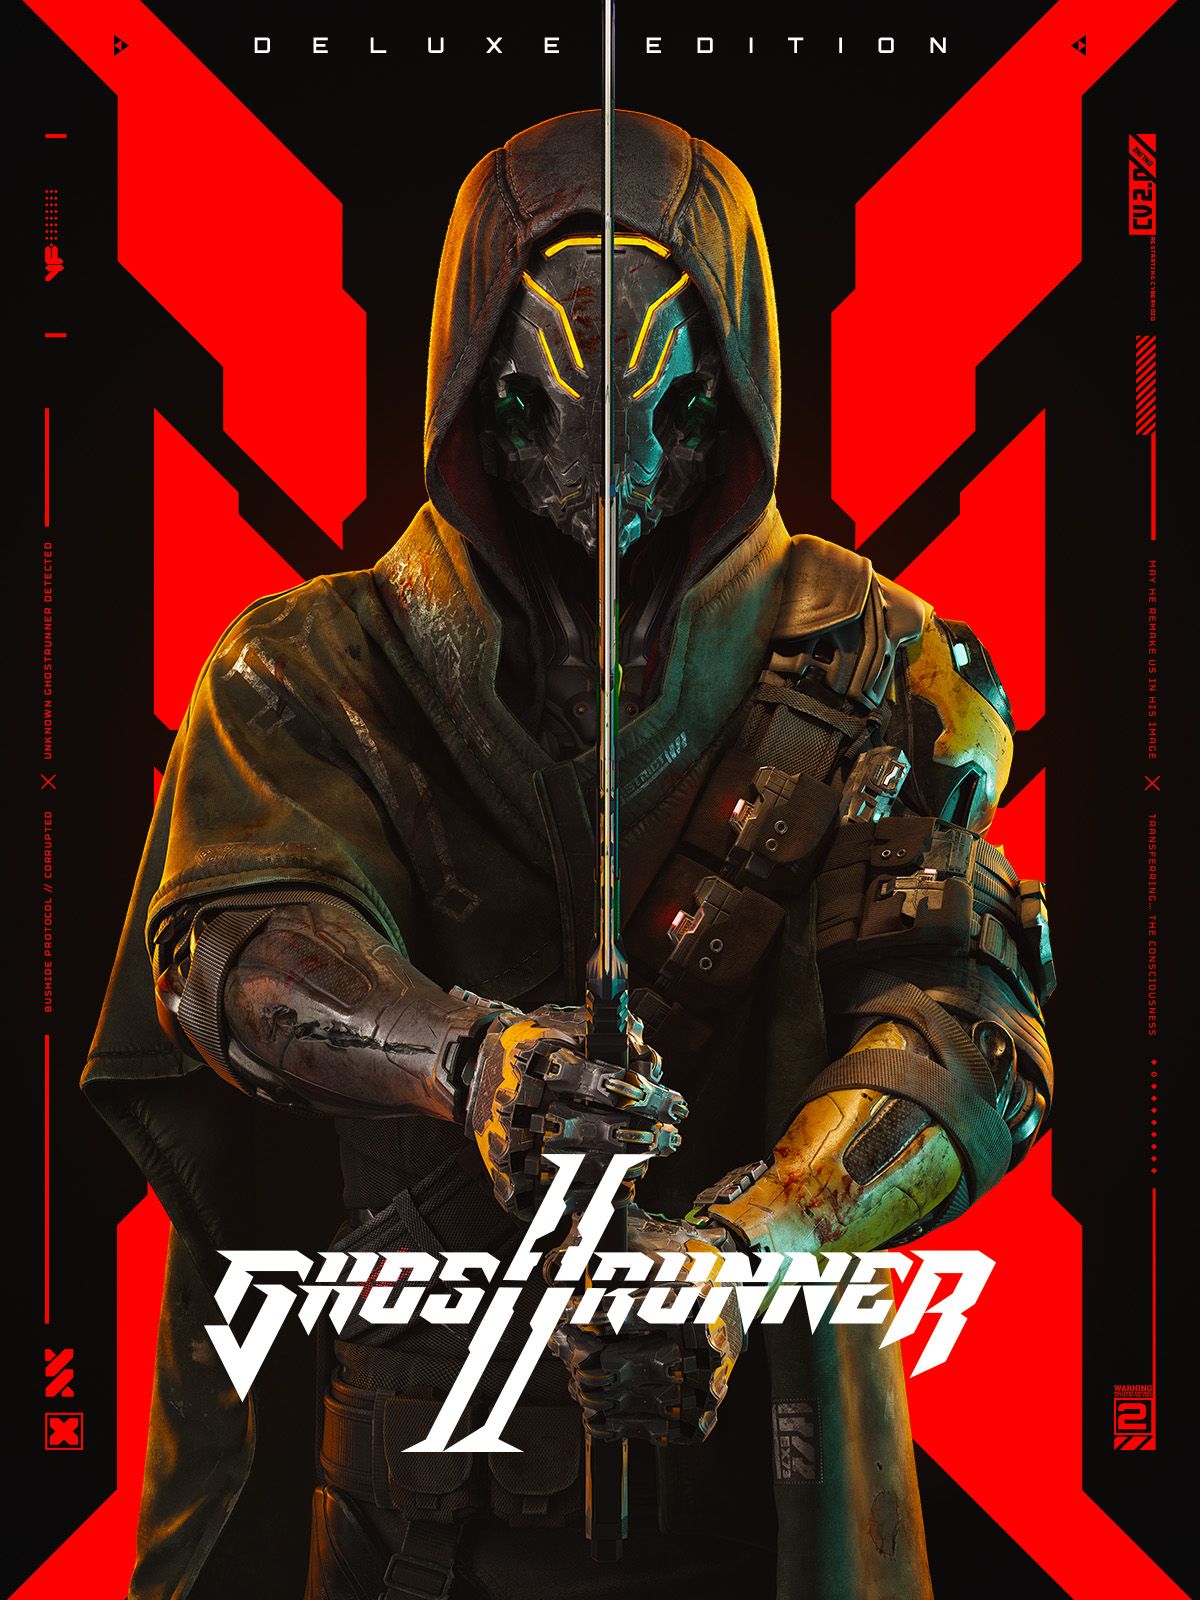 Ghostrunner 2. Deluxe Edition [PC, Цифровая версия] (Цифровая версия)